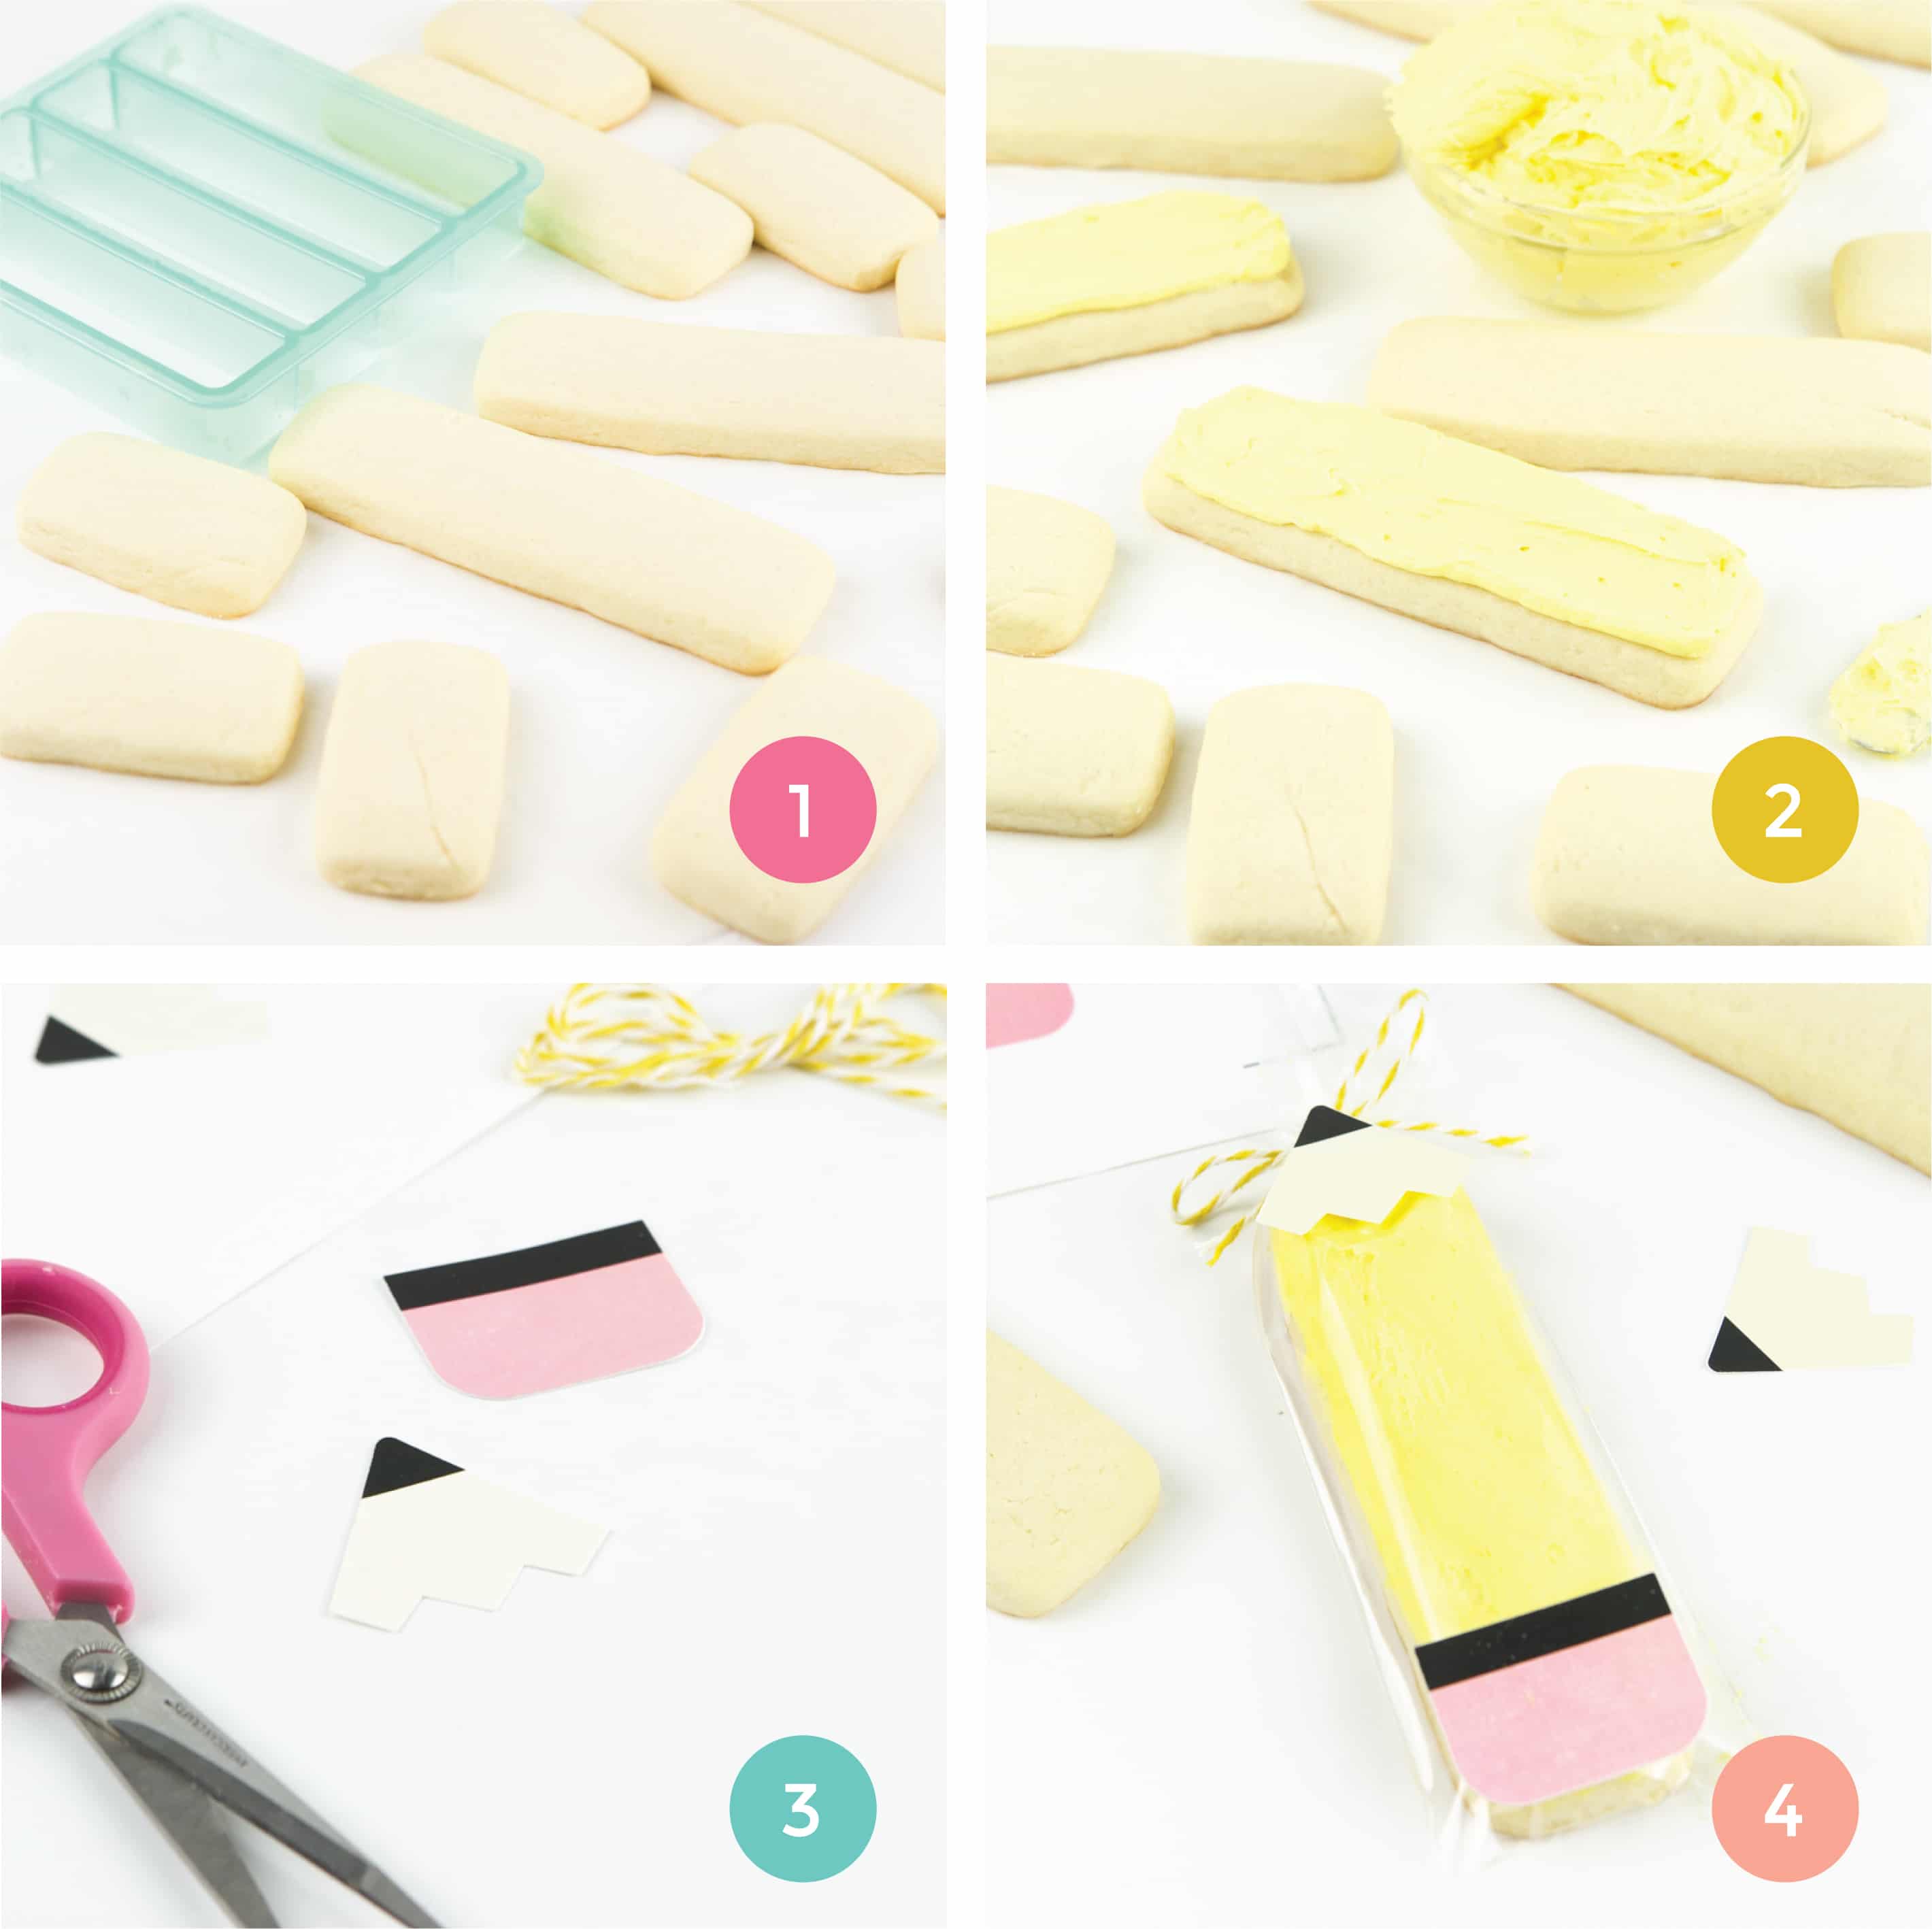 Steps on how to make pencil sugar cookies. Demonstrates how to cut out cookie sticks, how to frost with yellow icing, and how to cut pencil printables.